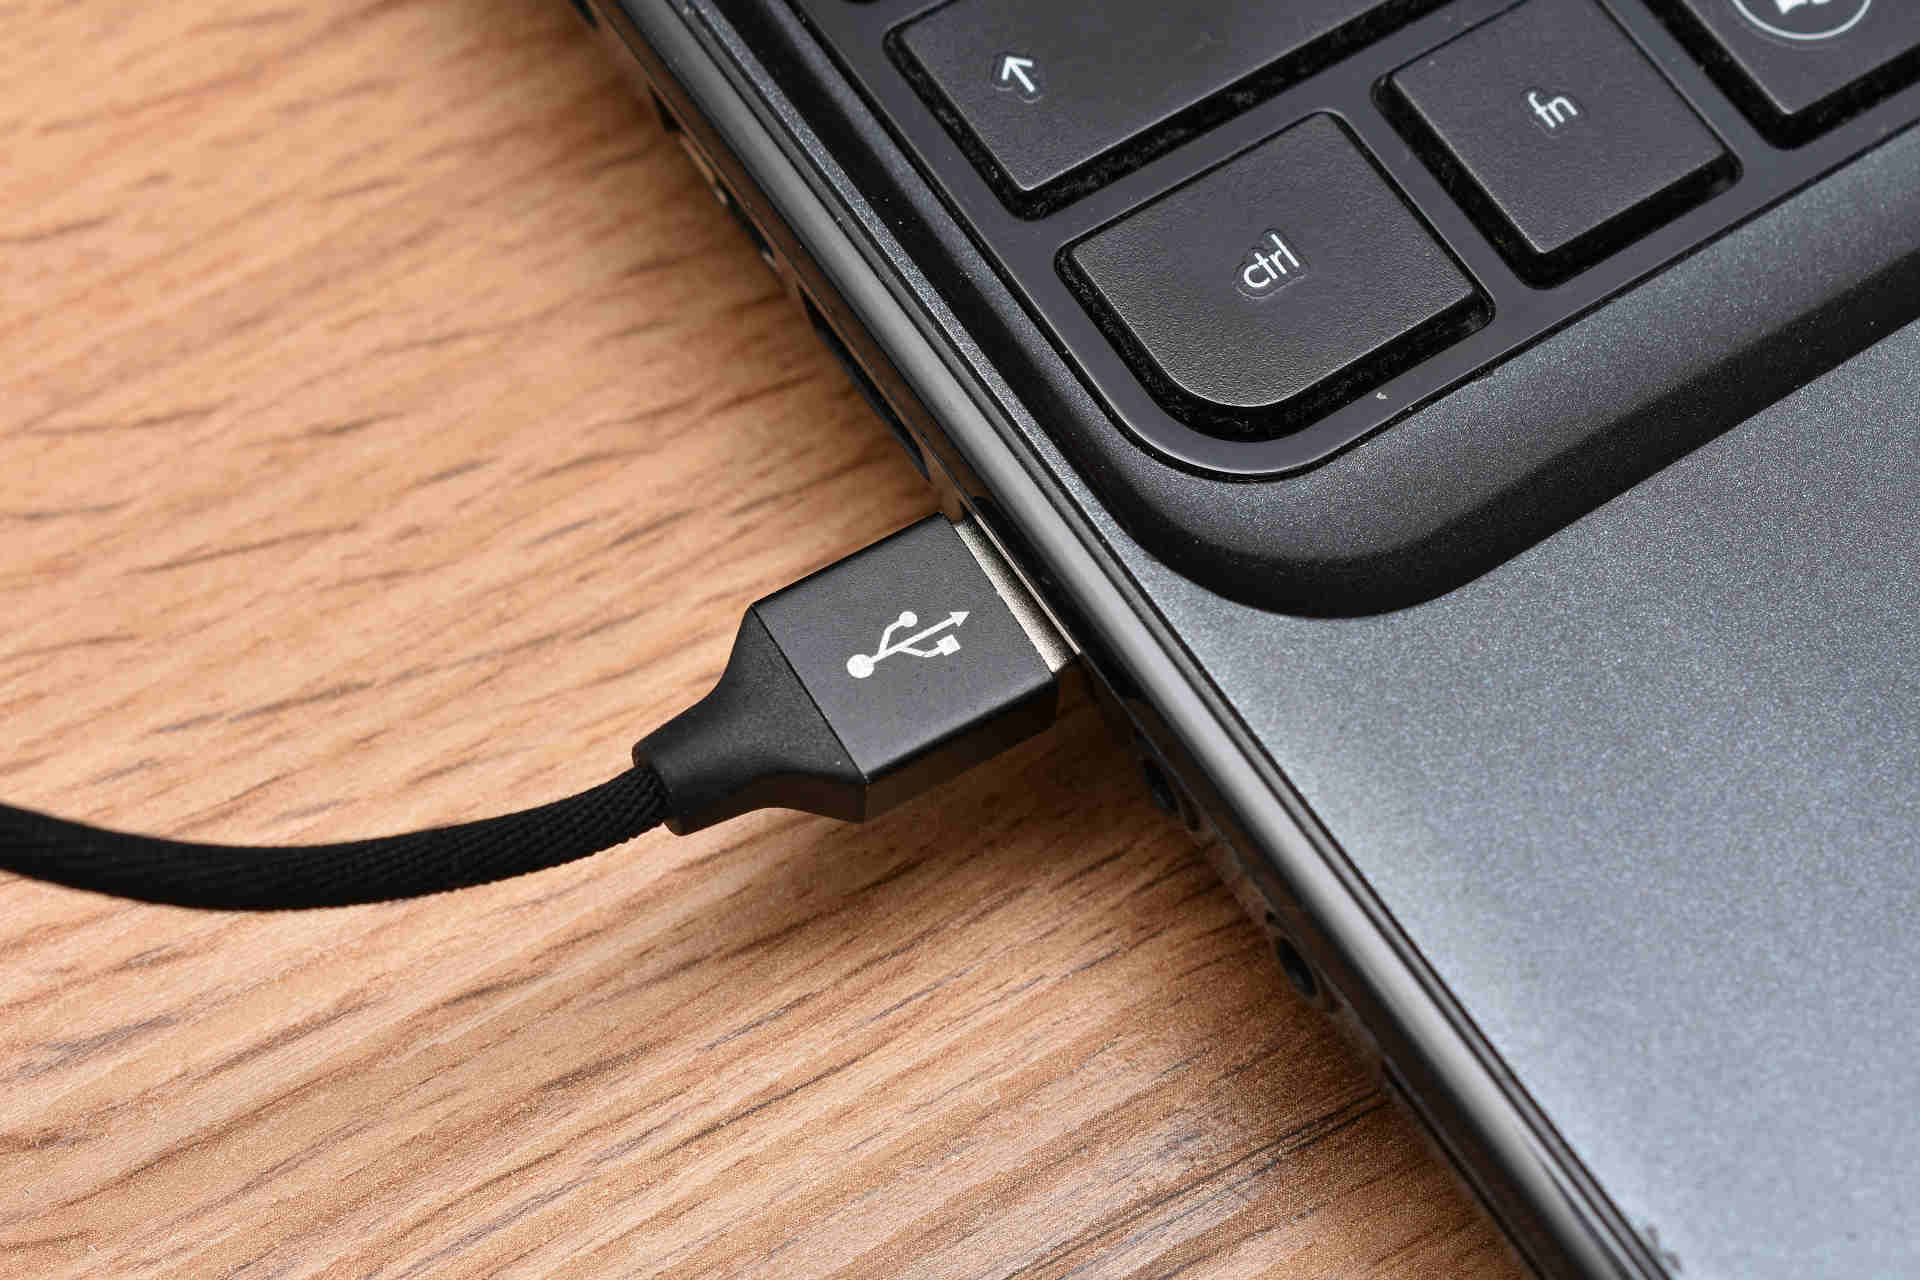 Best universal USB cable kits to buy